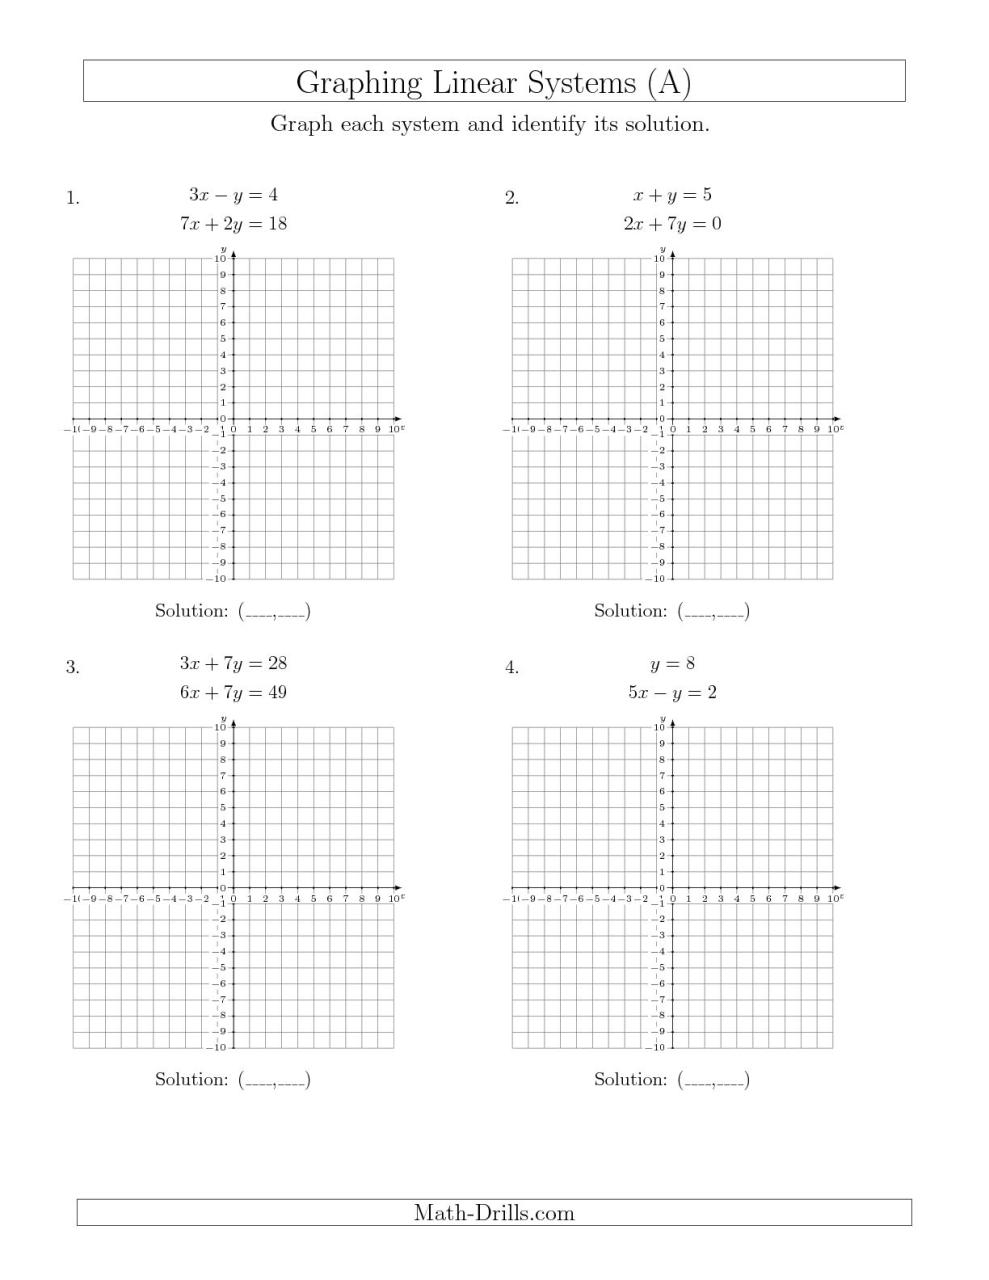 Solving Systems Of Equations By Graphing Worksheet Answers Kuta Software